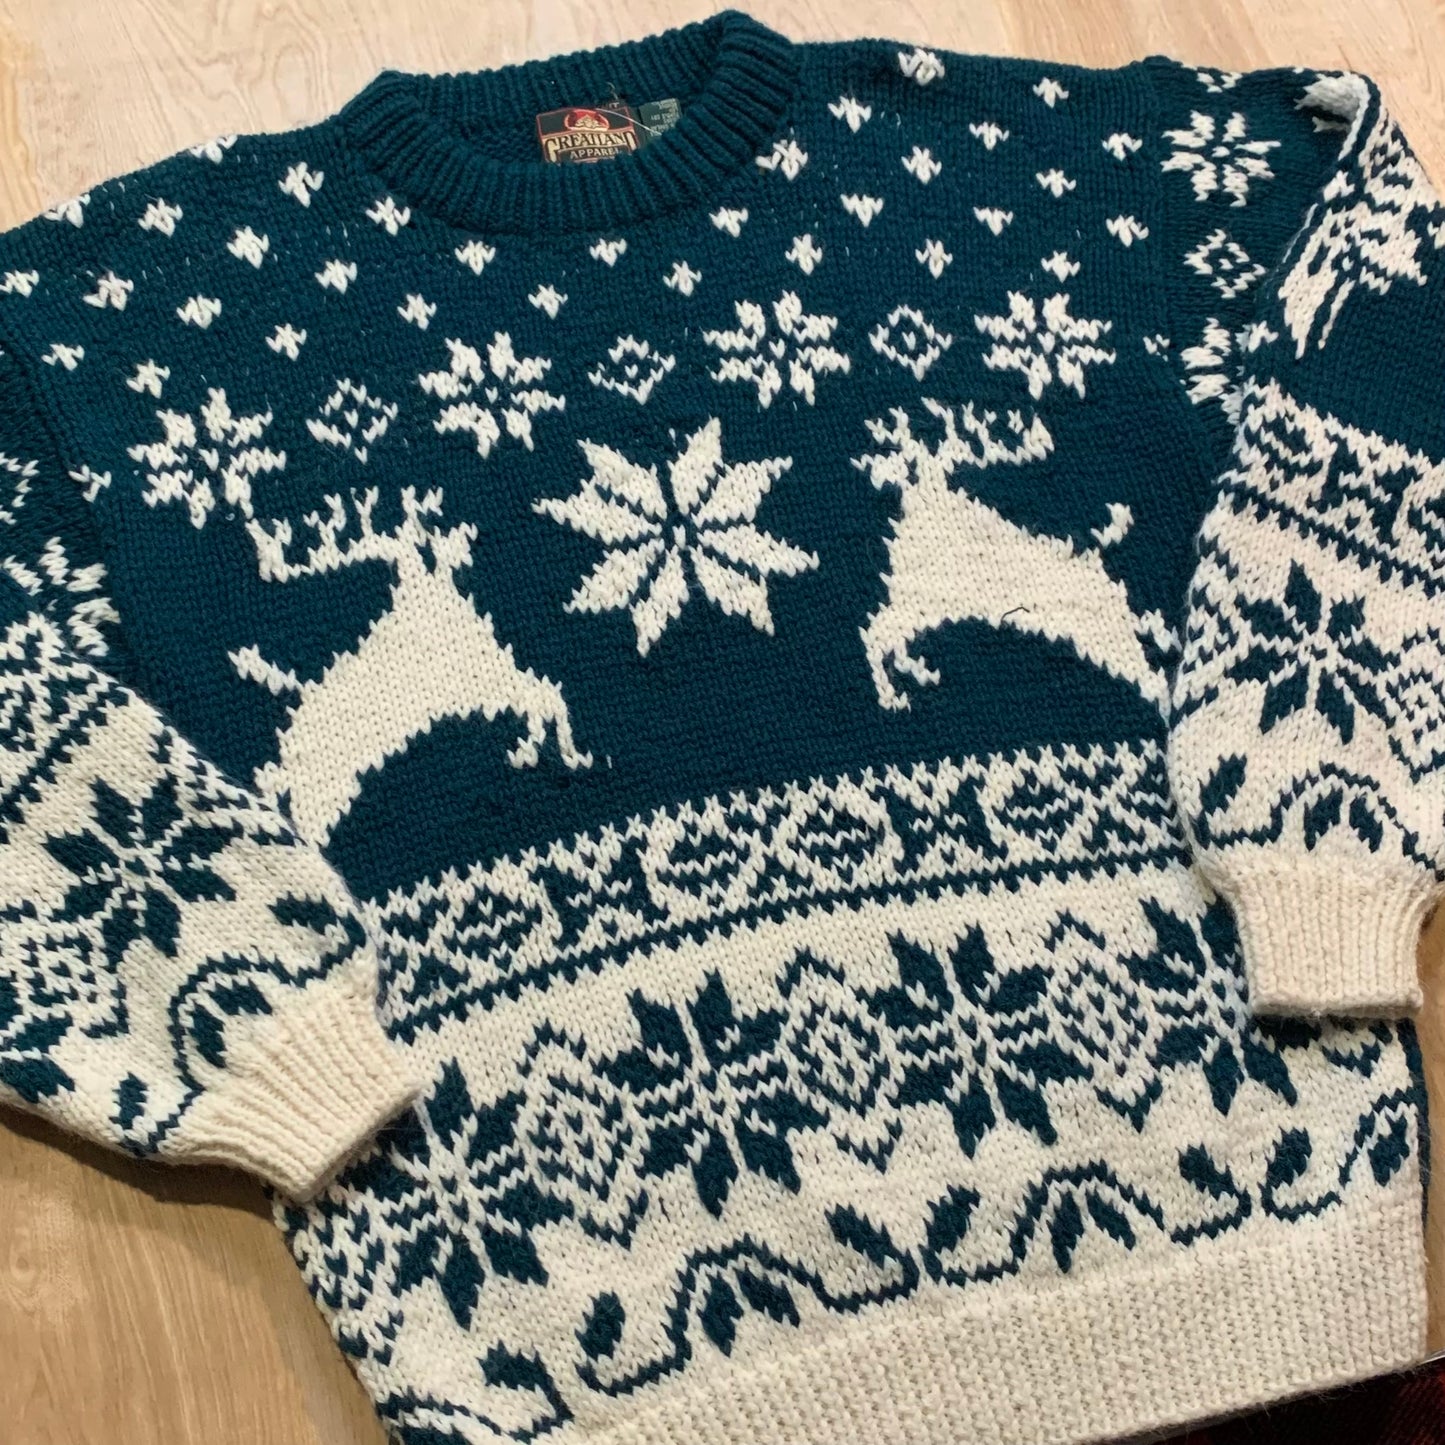 Vintage Hand Knit Reindeer and Snowflakes Holiday Sweater